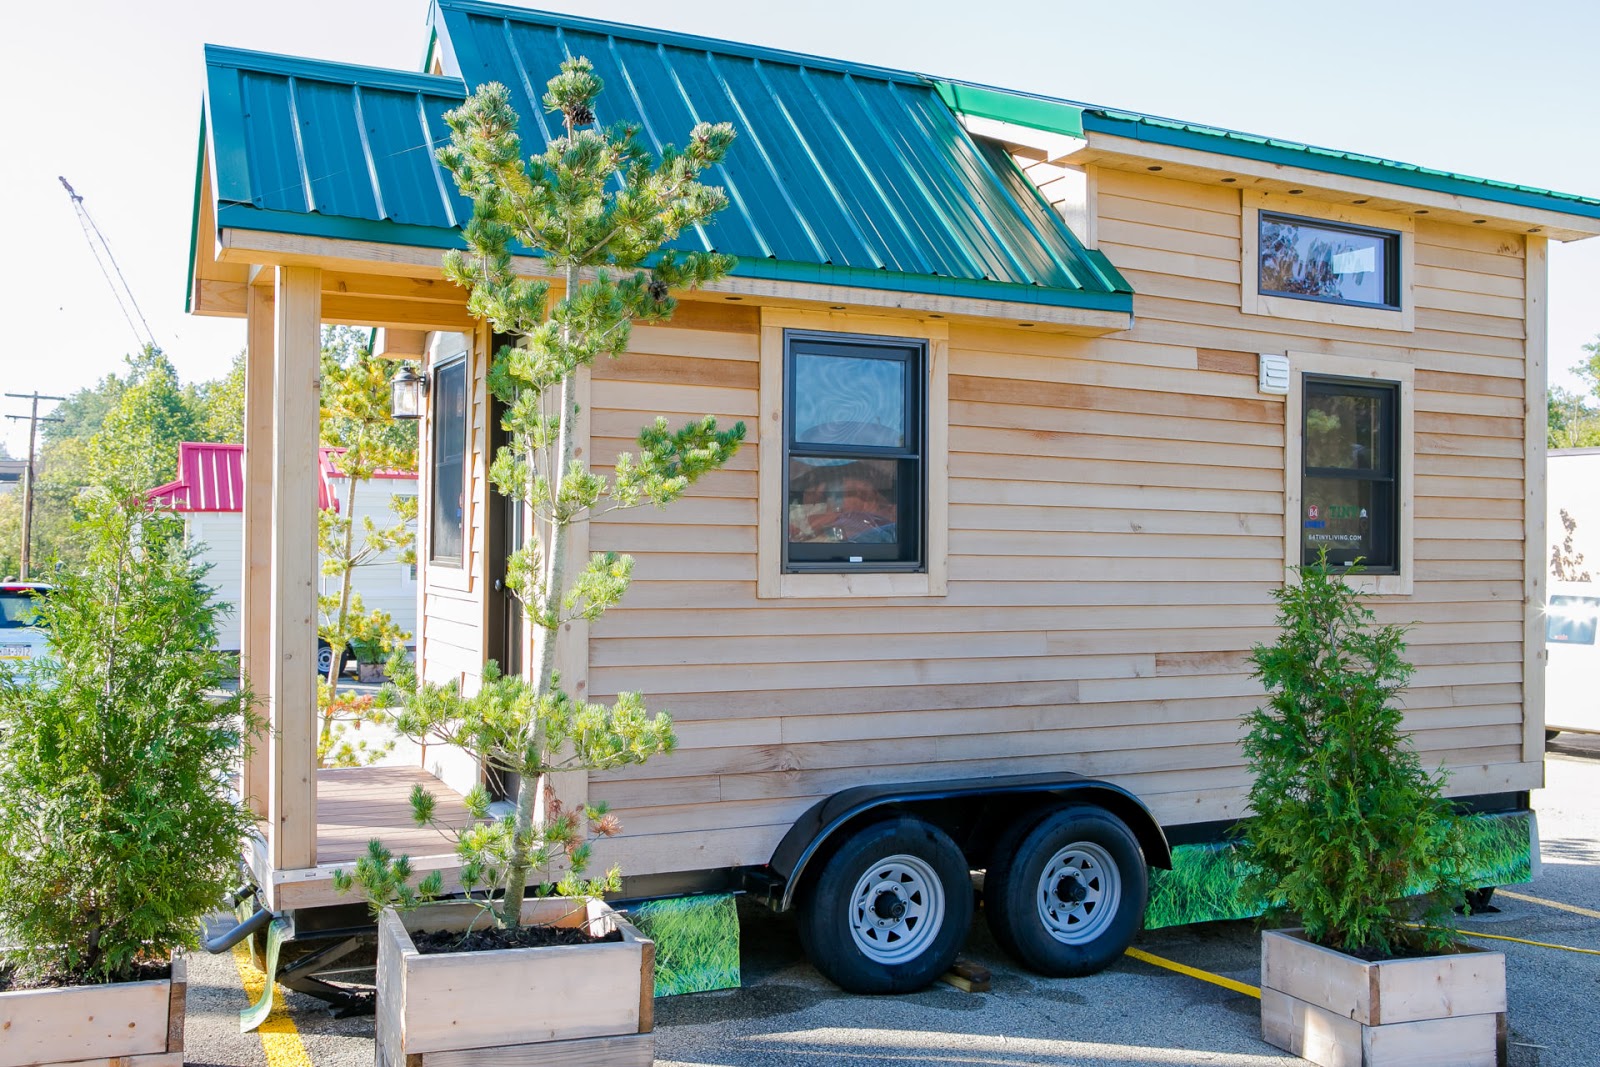 TINY HOUSE TOWN The Roving By 84 Lumber